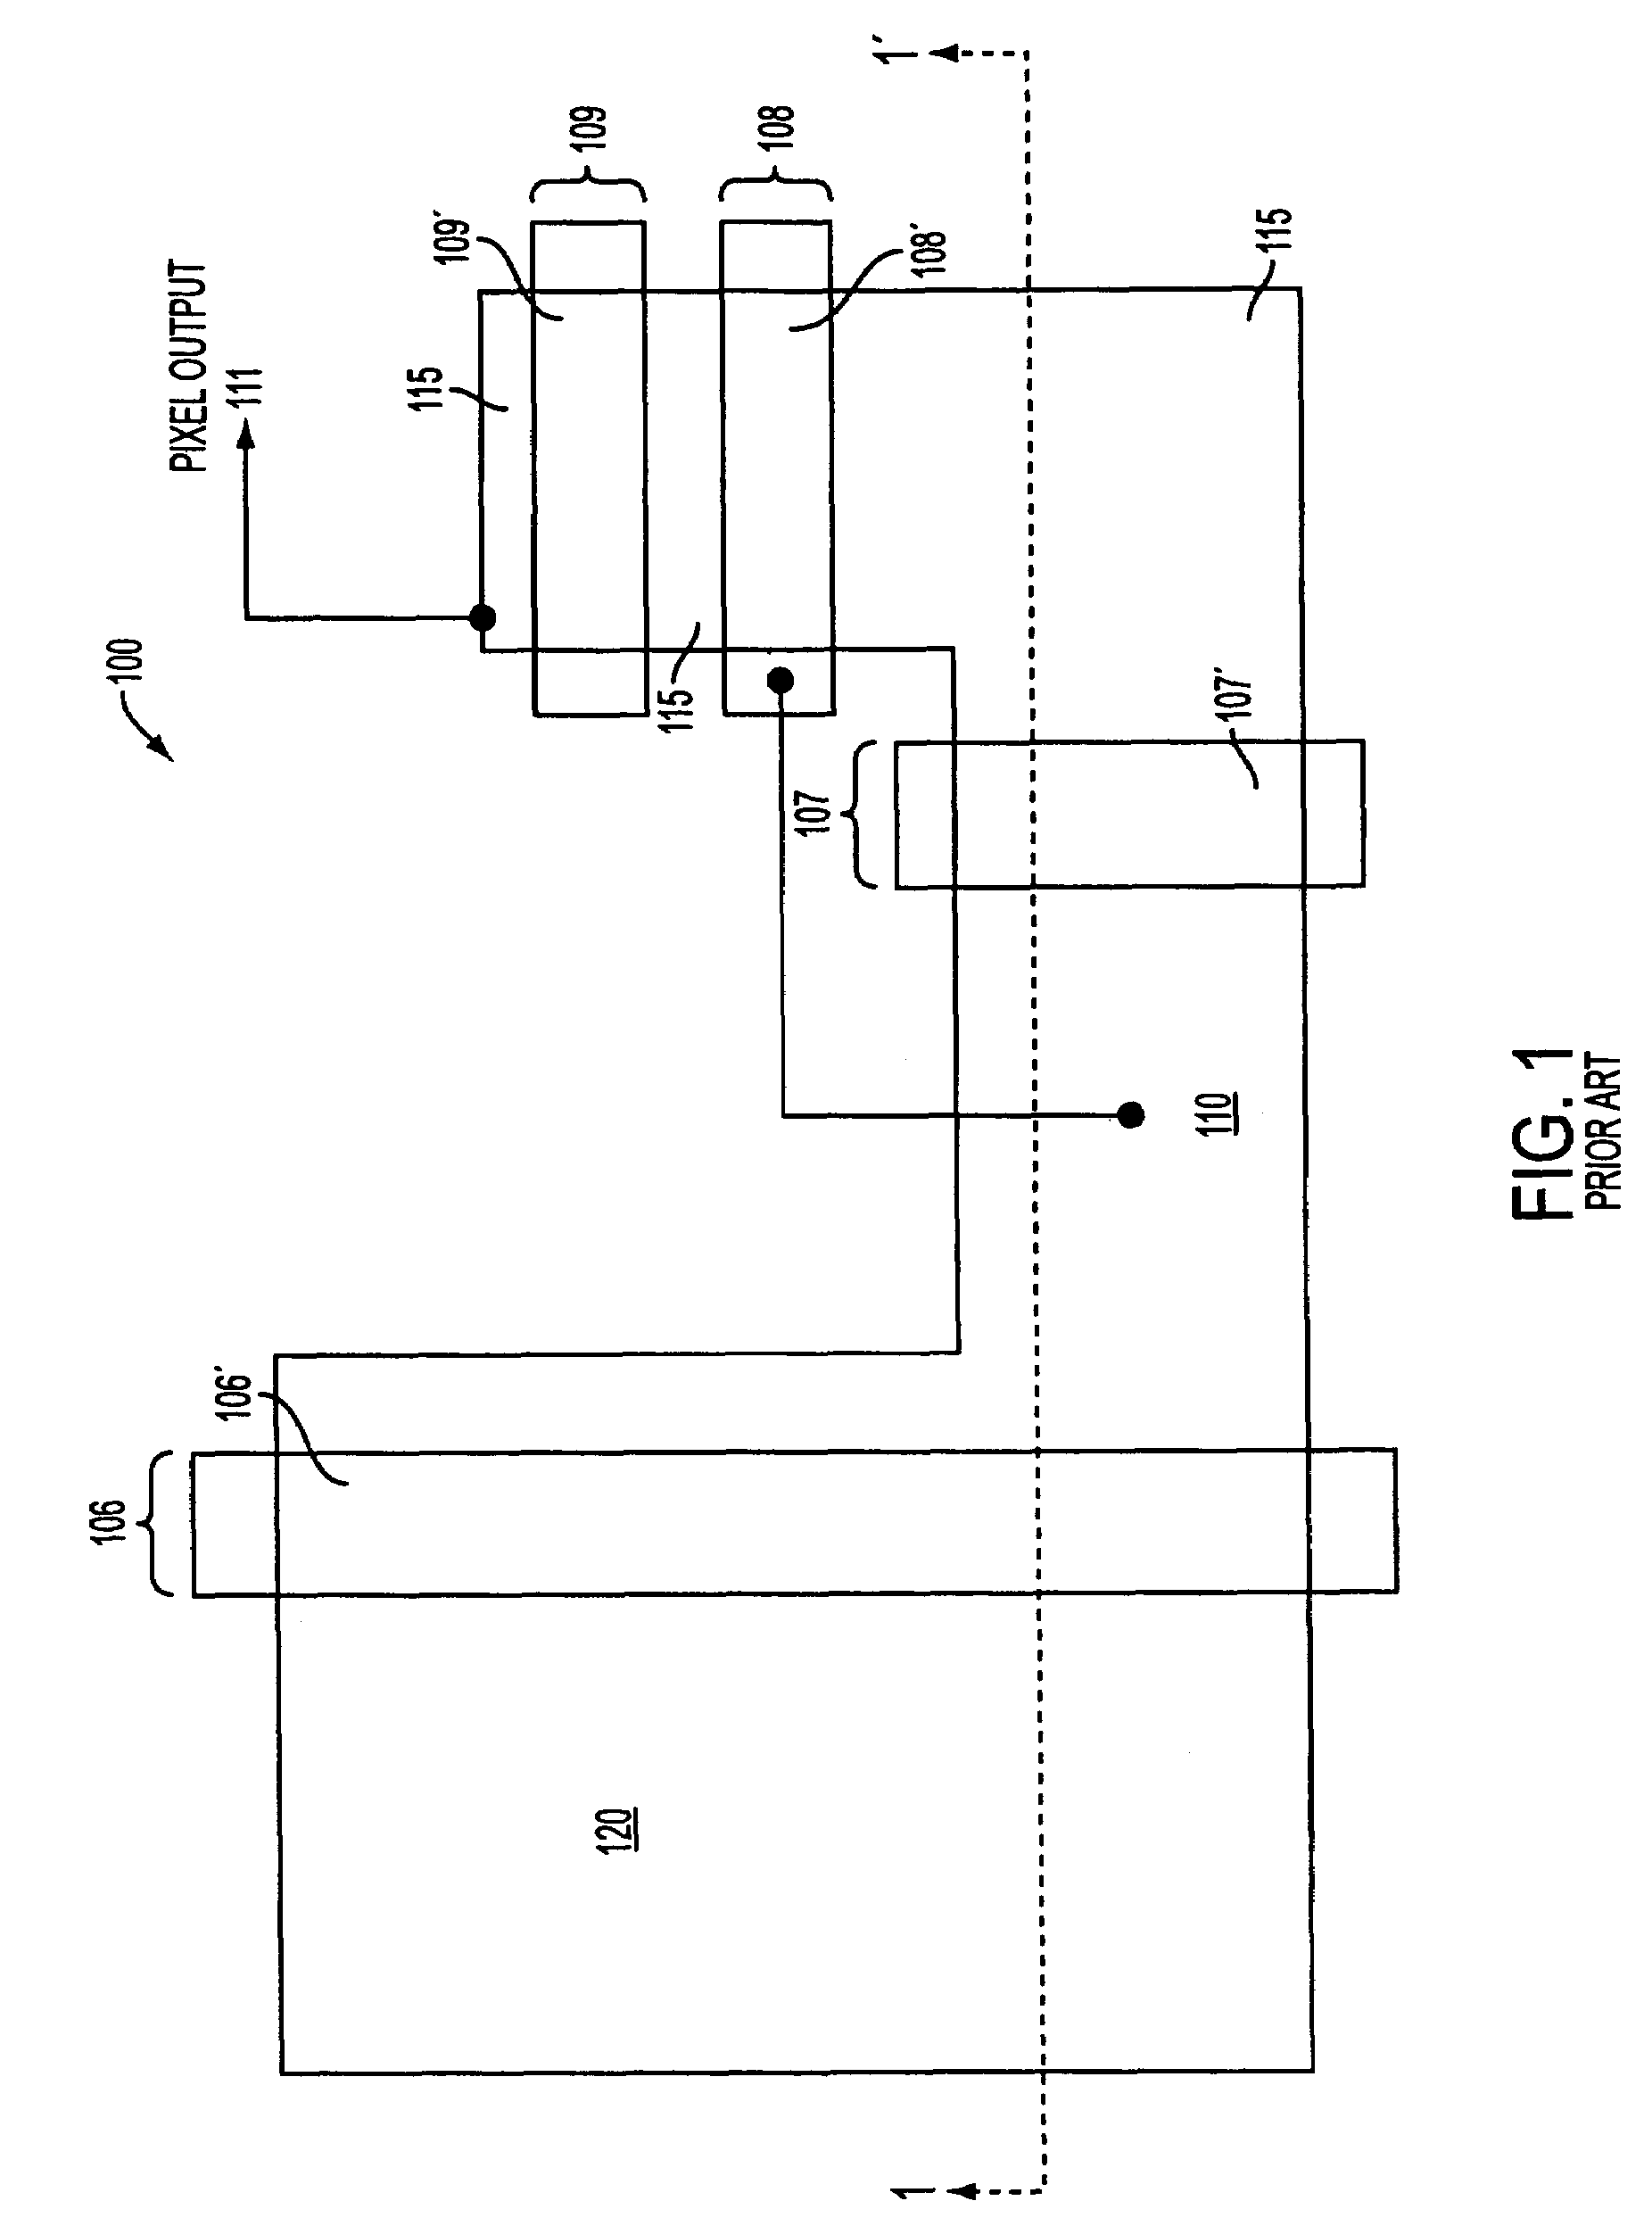 Dual conversion gain gate and capacitor combination